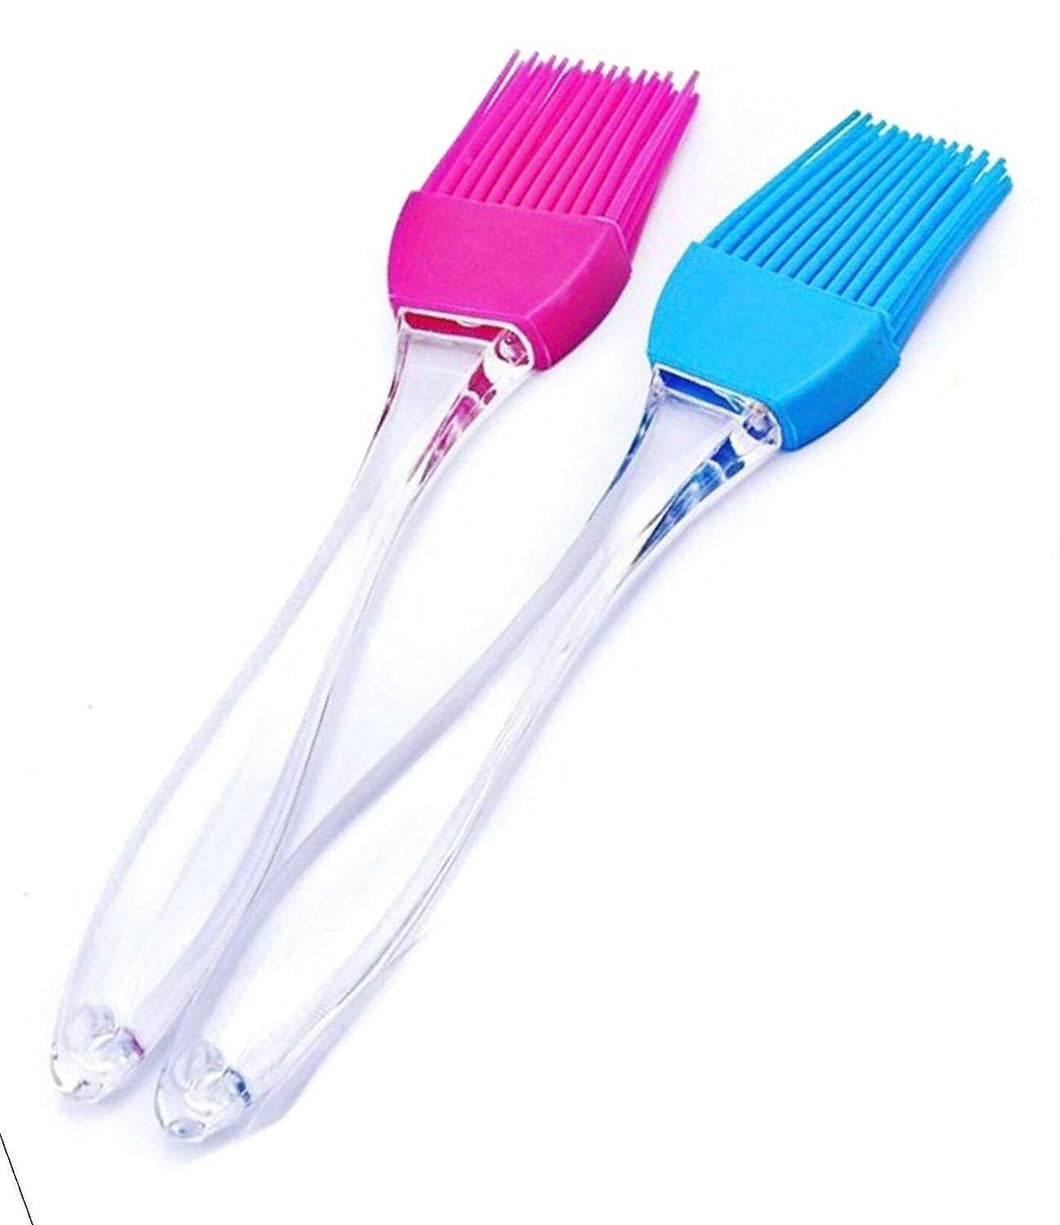 Silicon Oil Cooking Brush (Set of 2 Pieces)